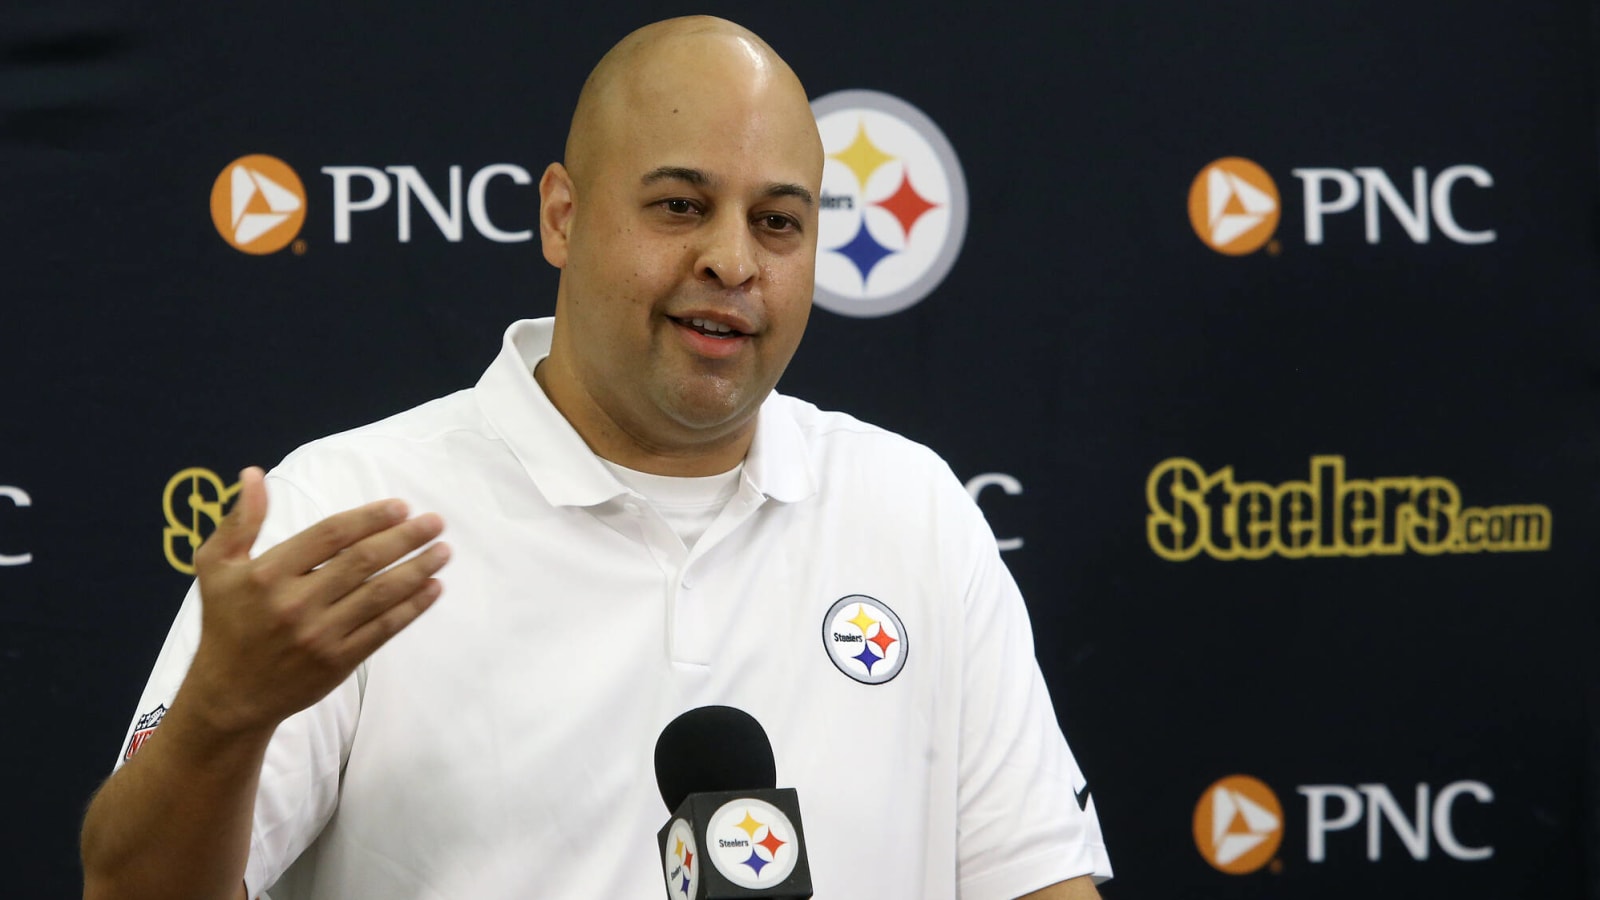 Steelers Moving Up In First Round To Select Offensive Tackle Is 'At The Top' Of Draft Day Scenarios